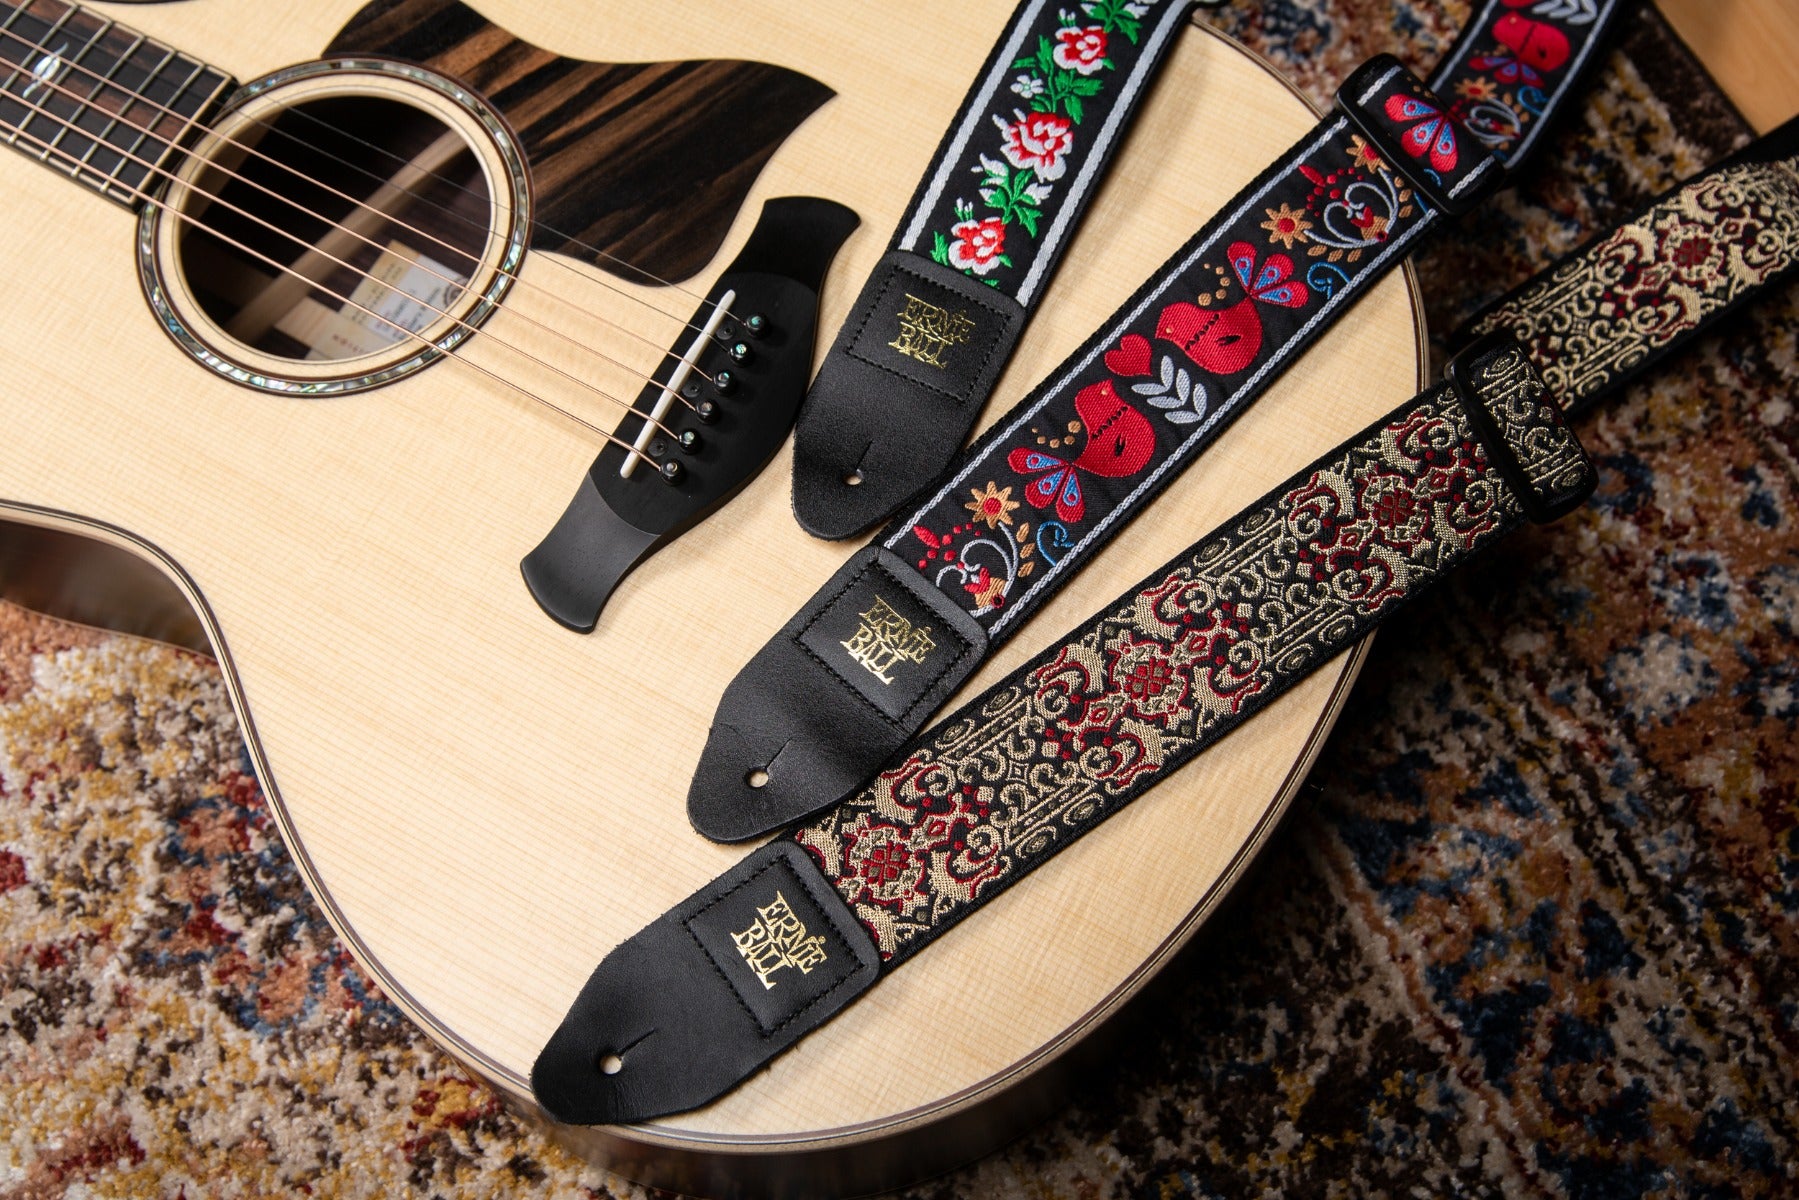 Image of several guitar straps including the Ernie Ball Persian Gold Jacquard Guitar Strap laying on the body of a Taylor guitar